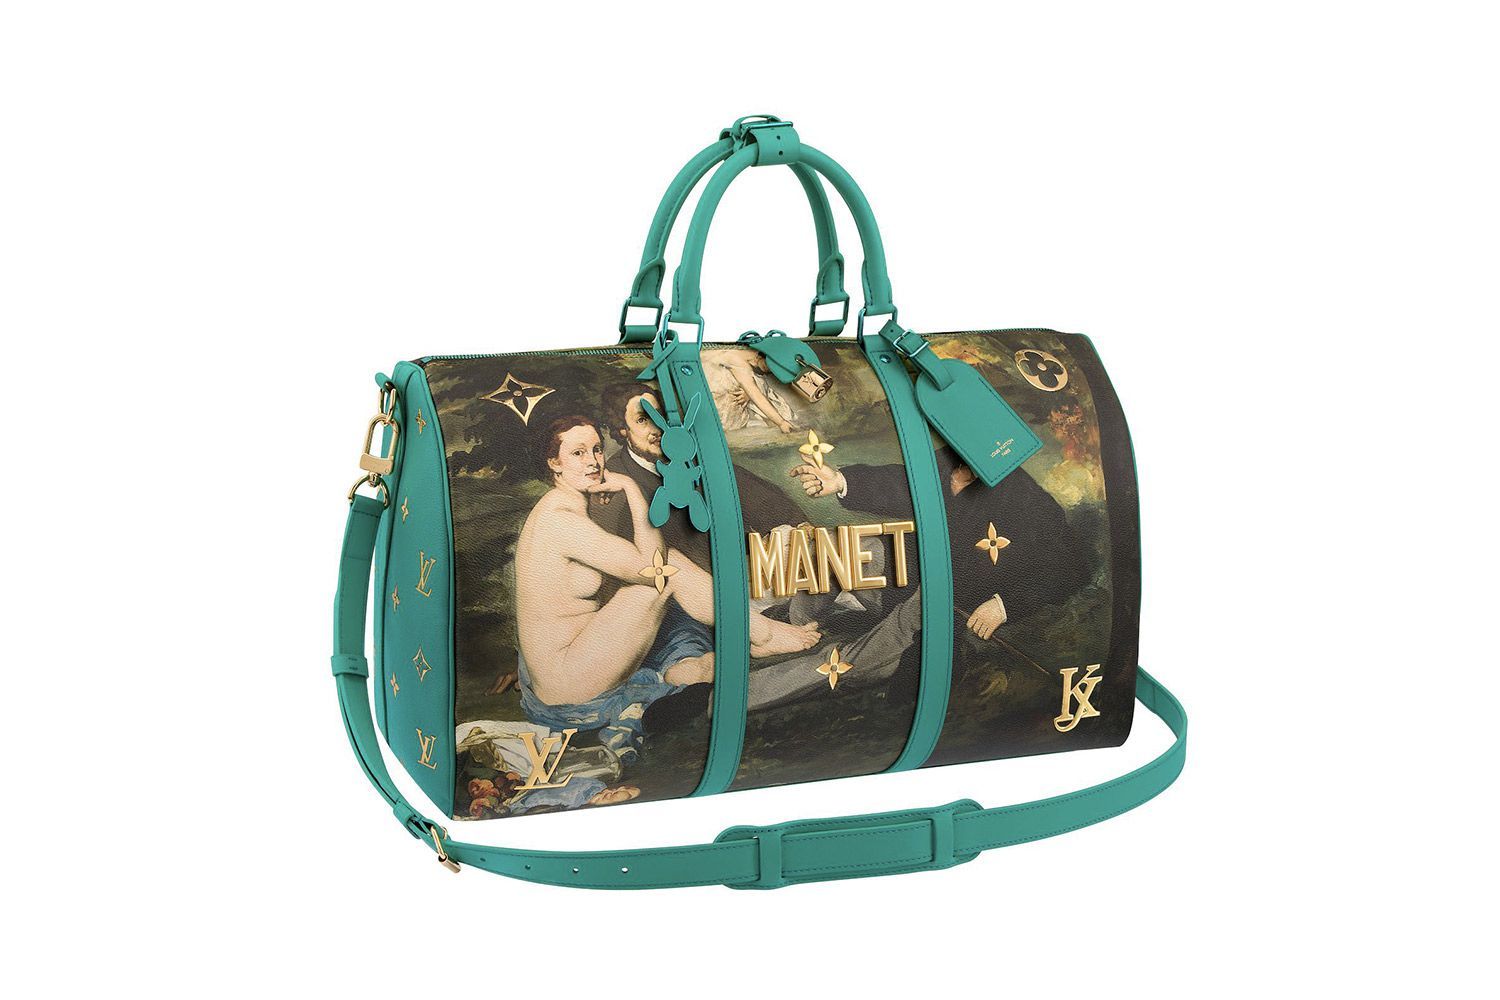 Louis Vuitton's Jeff Koons collaboration returns with a second